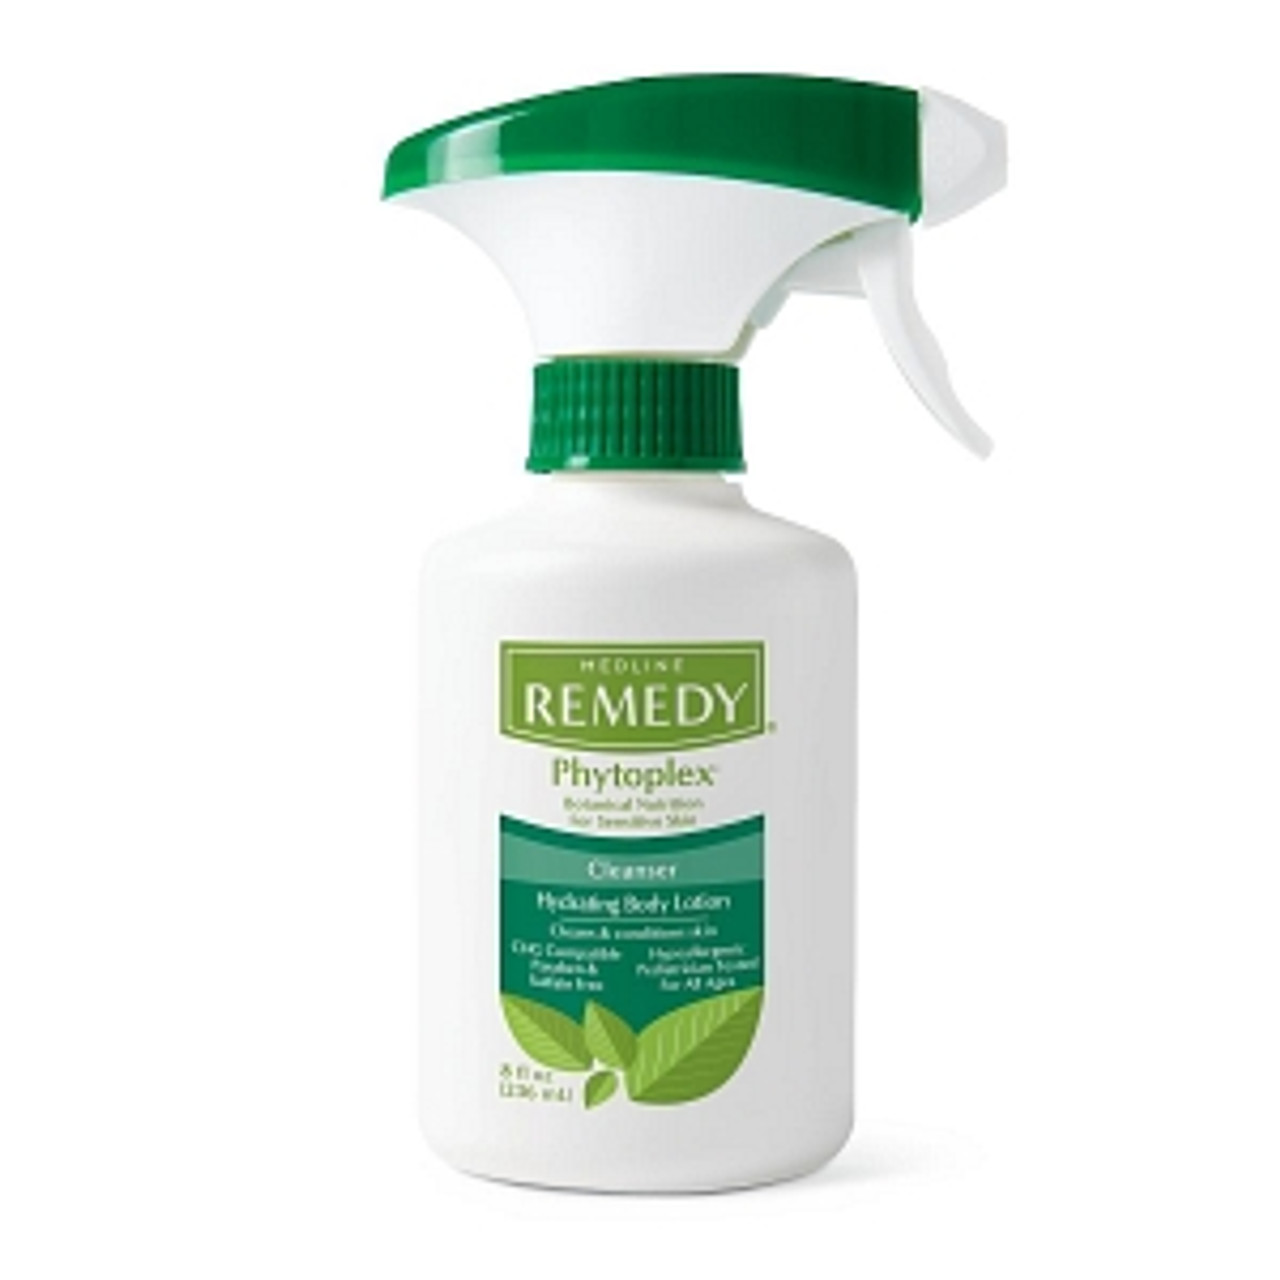 No-rinse lotion formula helps cleanse and moisturize the skin in one application; also great for removing sticky barriers and pastes
Added botanicals provide nourishment
Convenient trigger sprayer for easy application
Sulfate- and paraben-free and pH balanced
Pediatrician tested and ideal for all ages